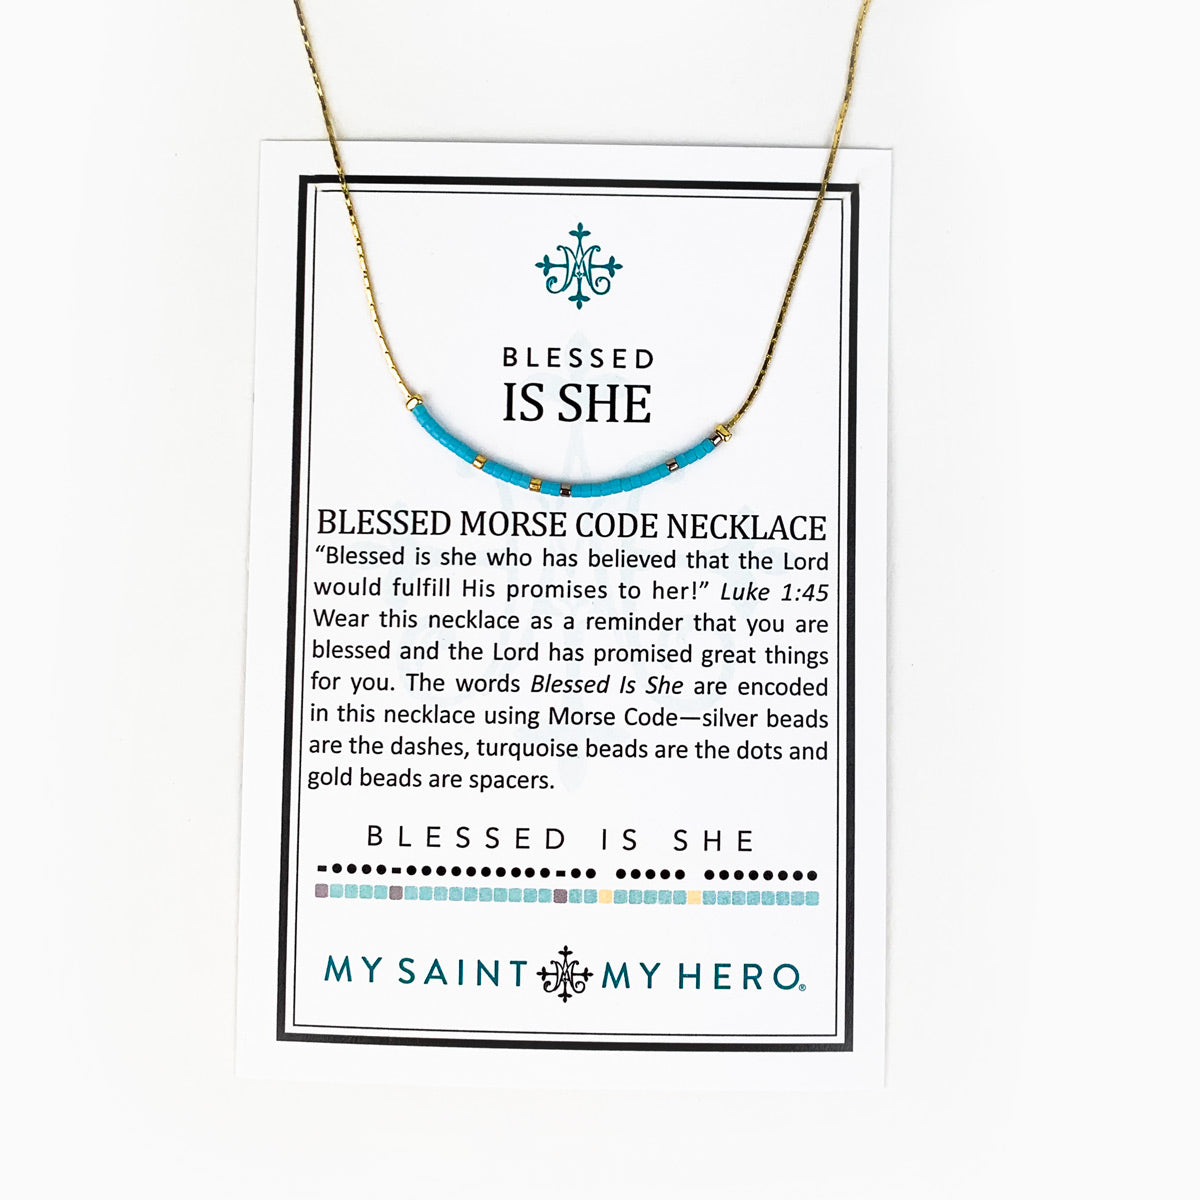 Blessed is She Morse Code Necklace